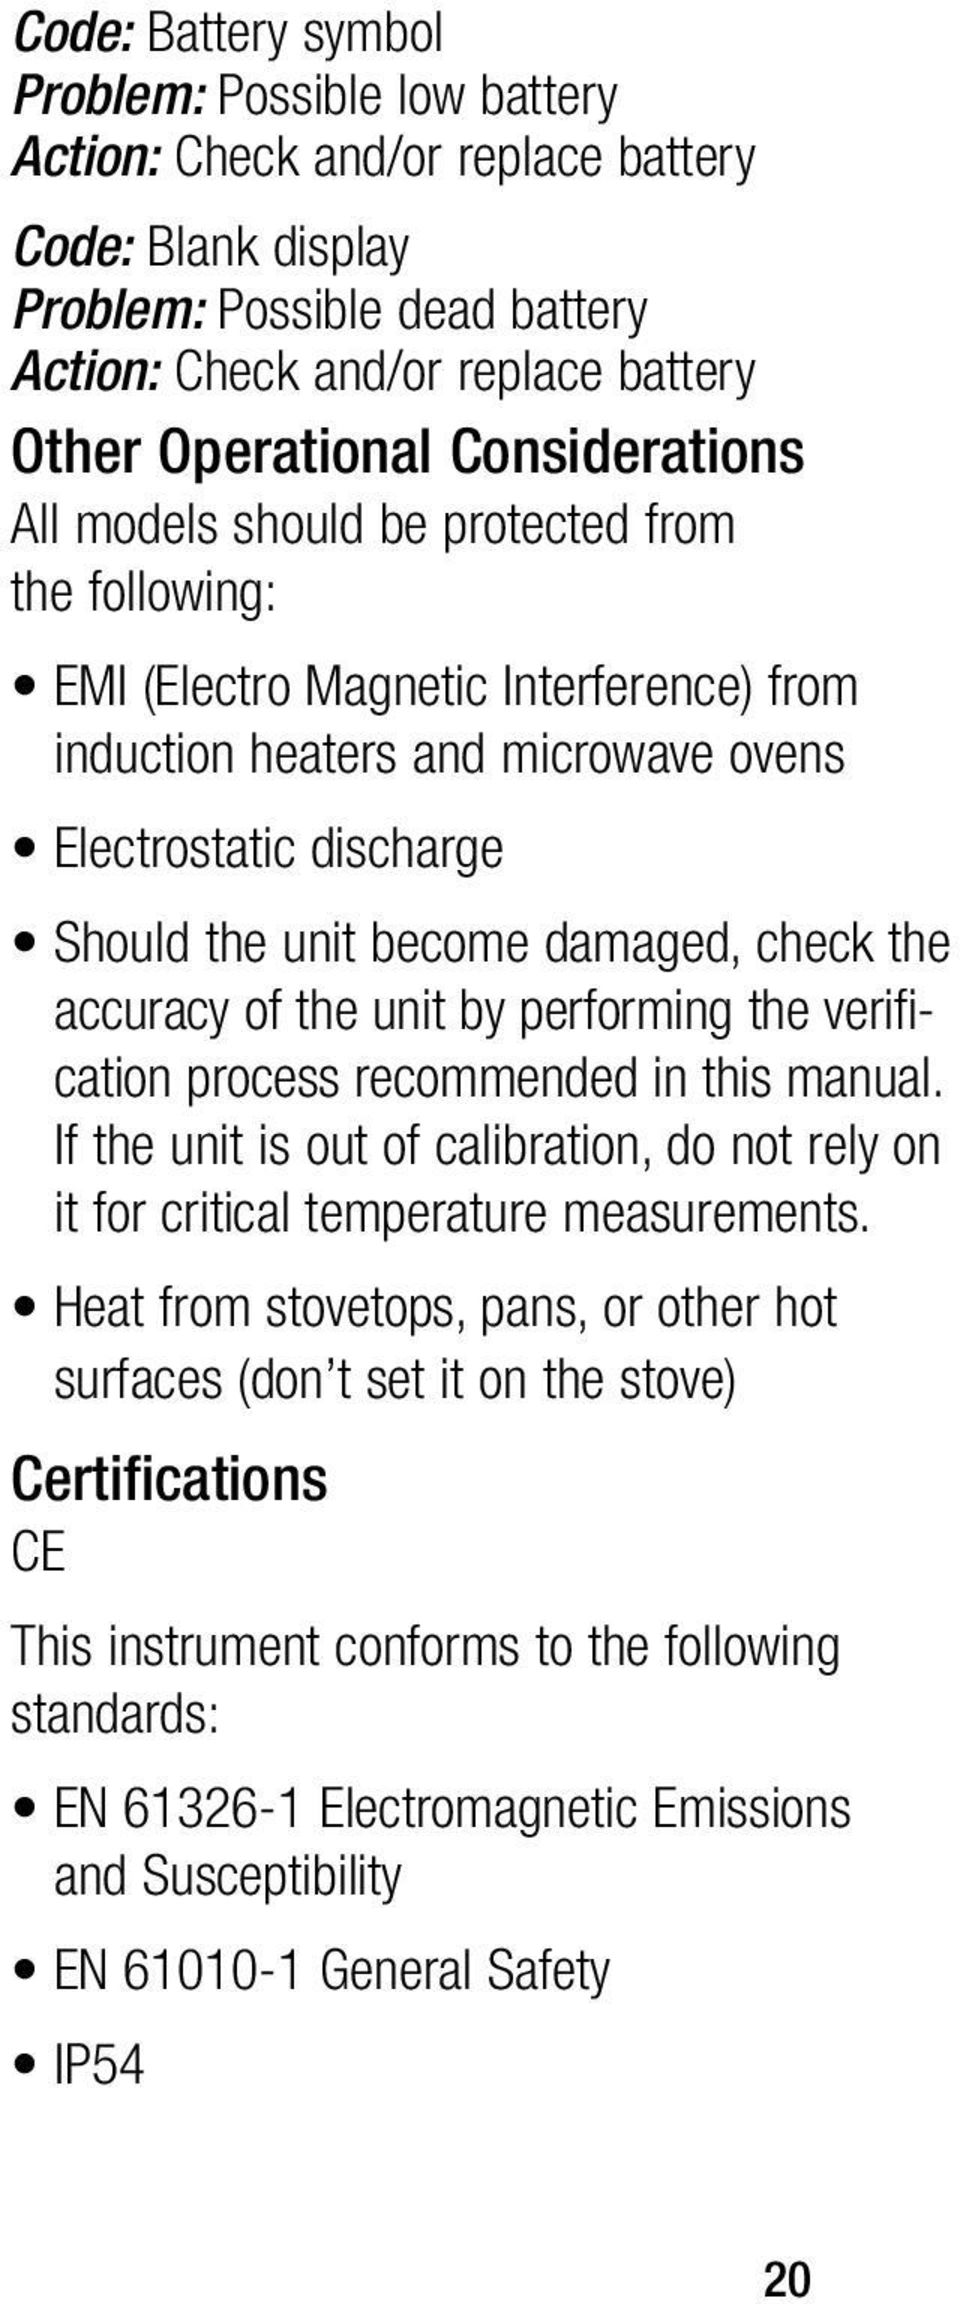 damaged, check the accuracy of the unit by performing the verification process recommended in this manual. If the unit is out of calibration, do not rely on it for critical temperature measurements.